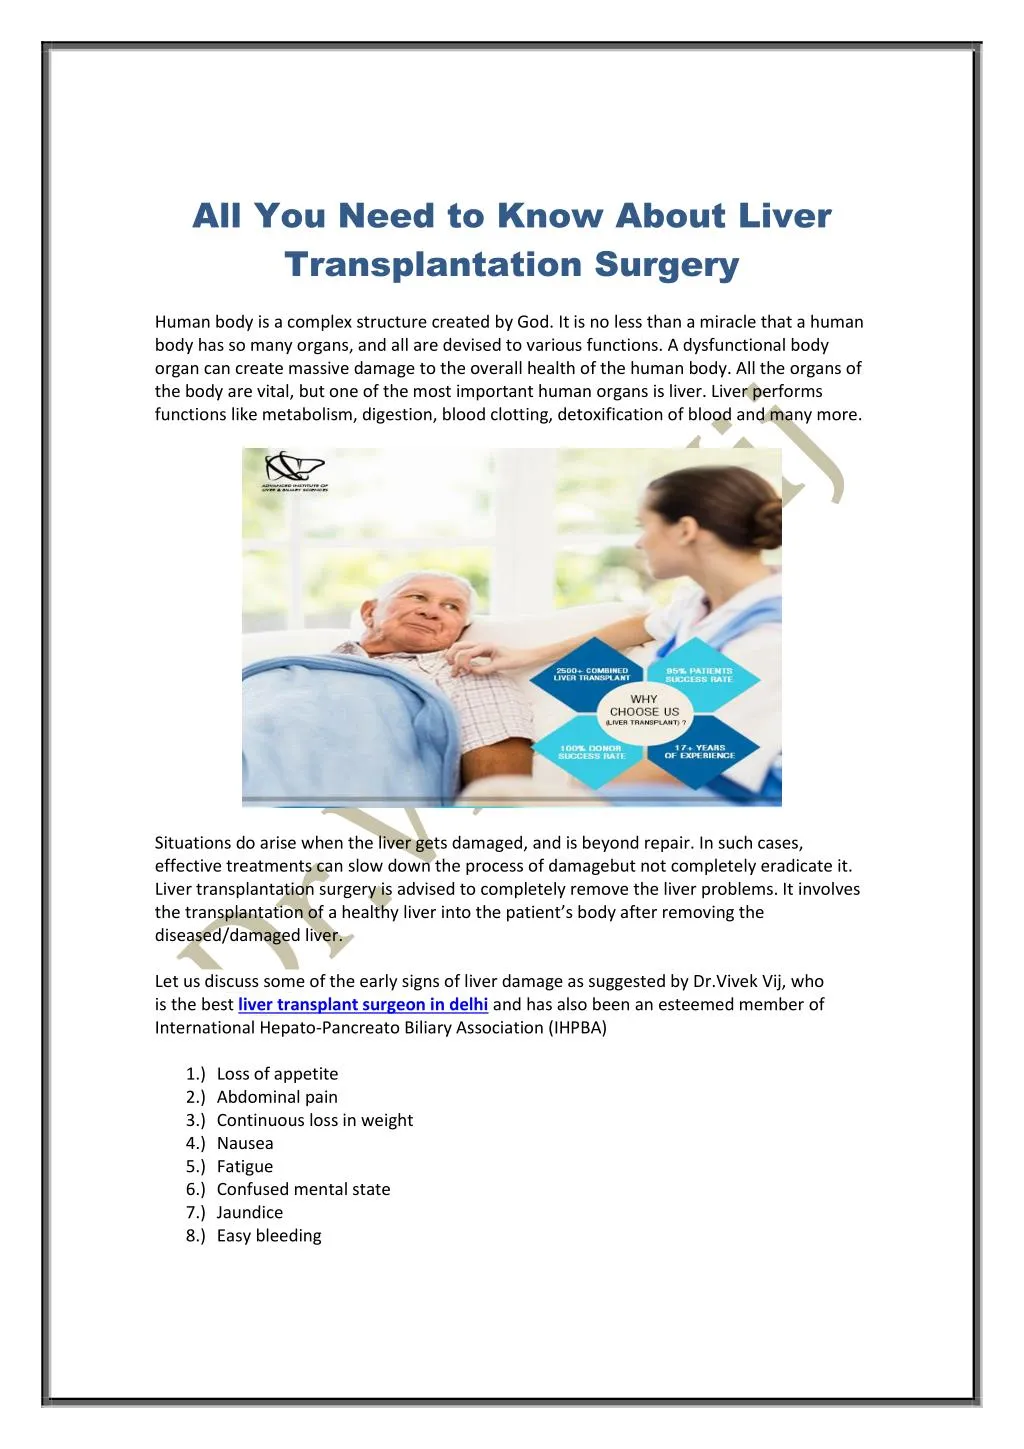 all you need to know about liver transplantation